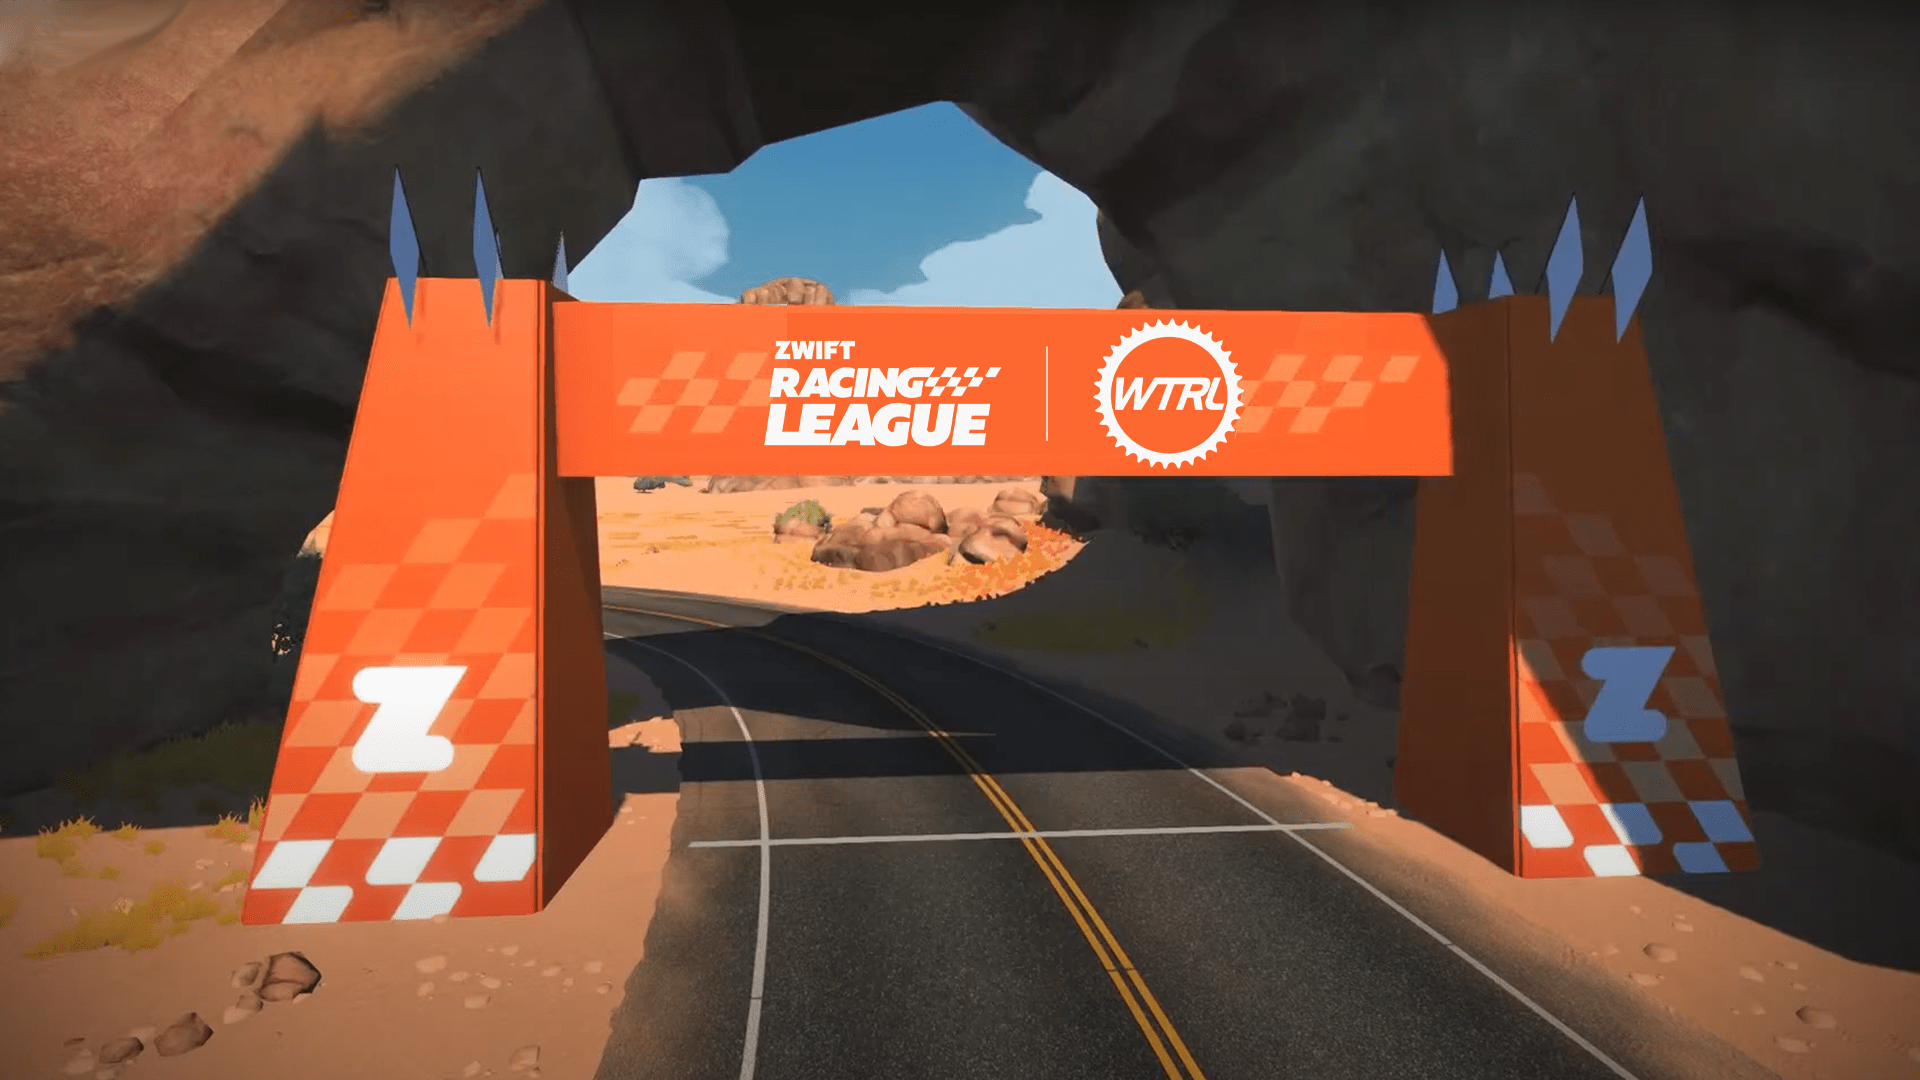 Coalition are 3rd biggest team in Zwift Racing League